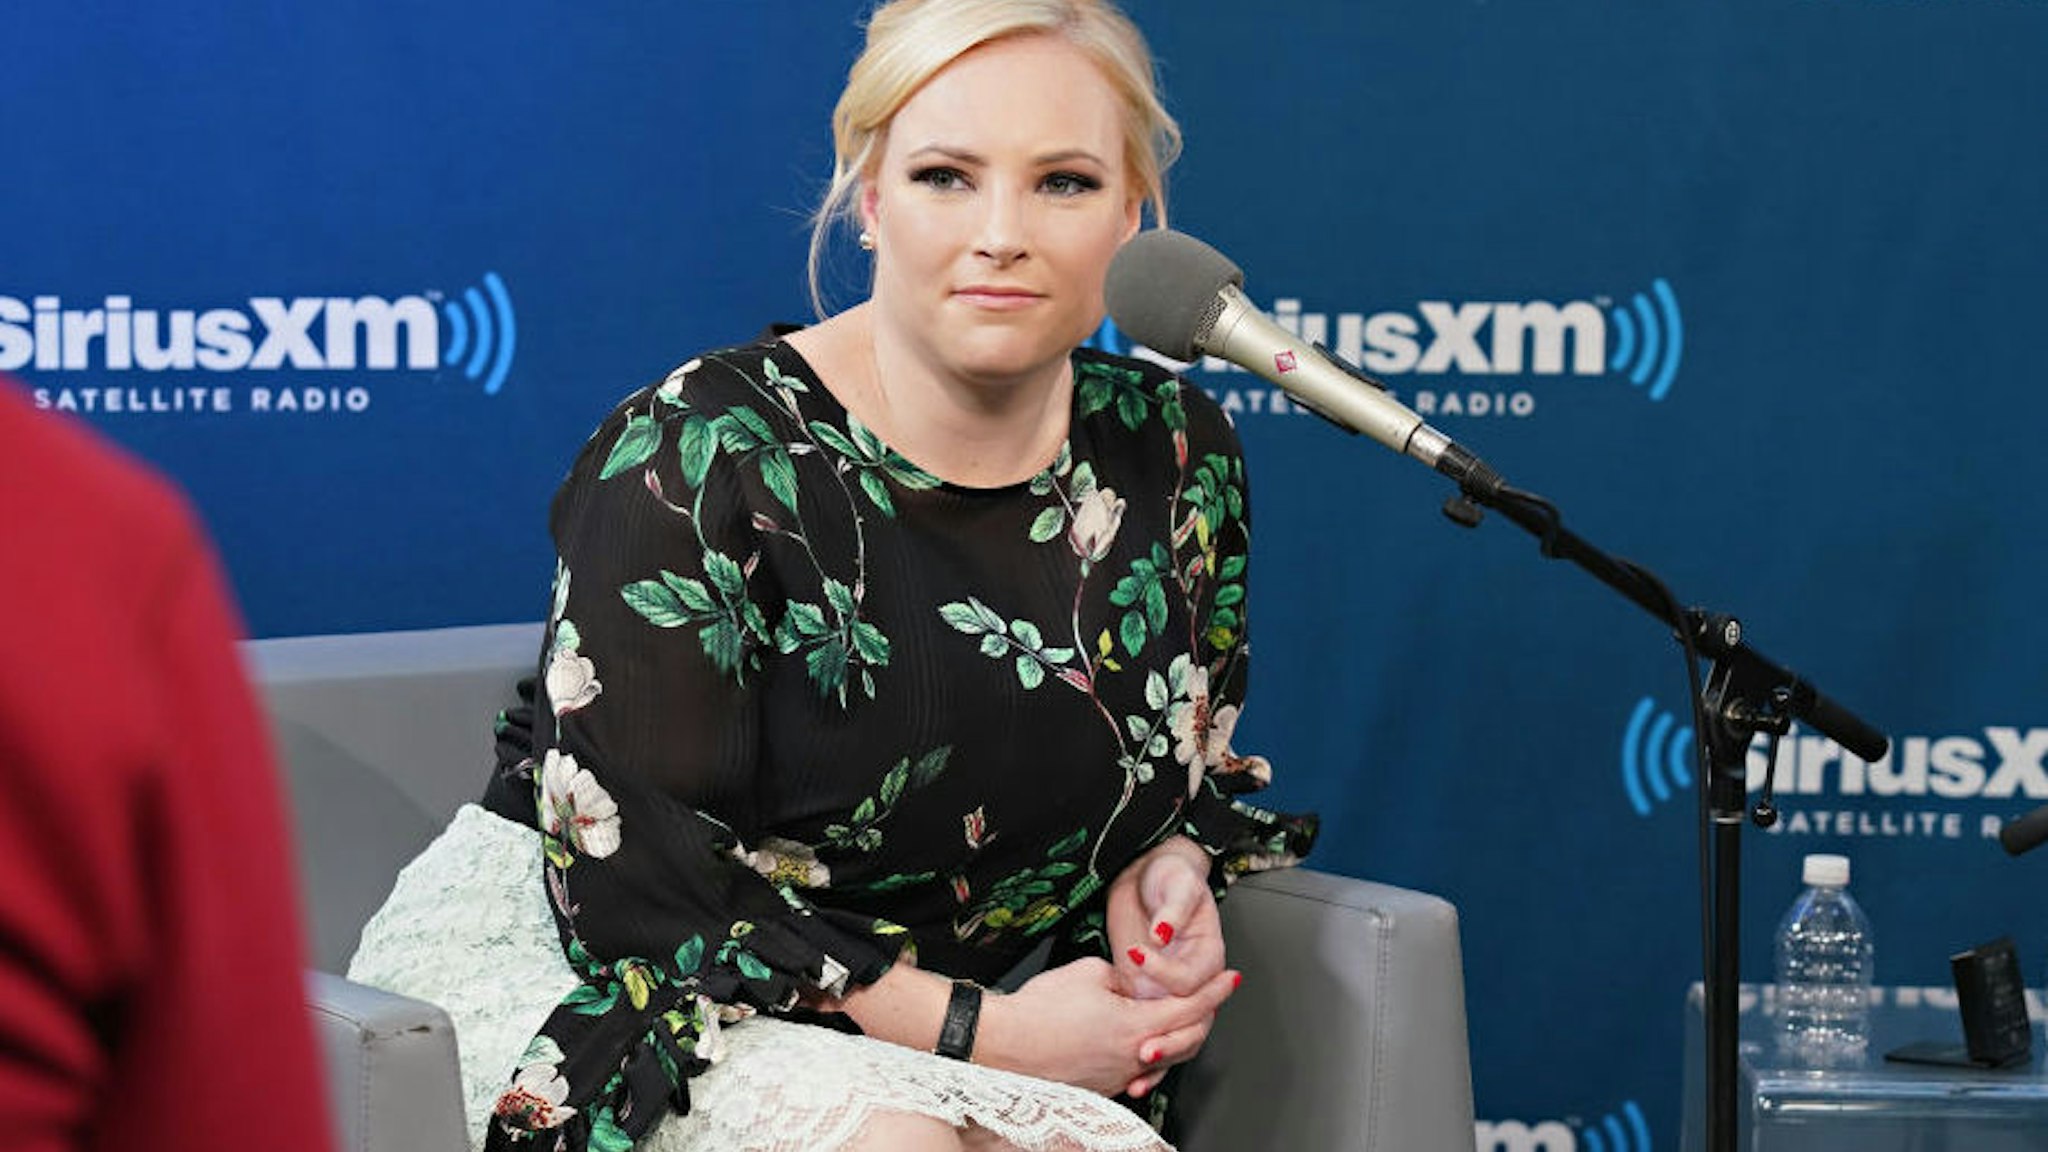 Meghan McCain joins host Julie Mason during a SiriusXM event on February 5, 2018 in New York City.